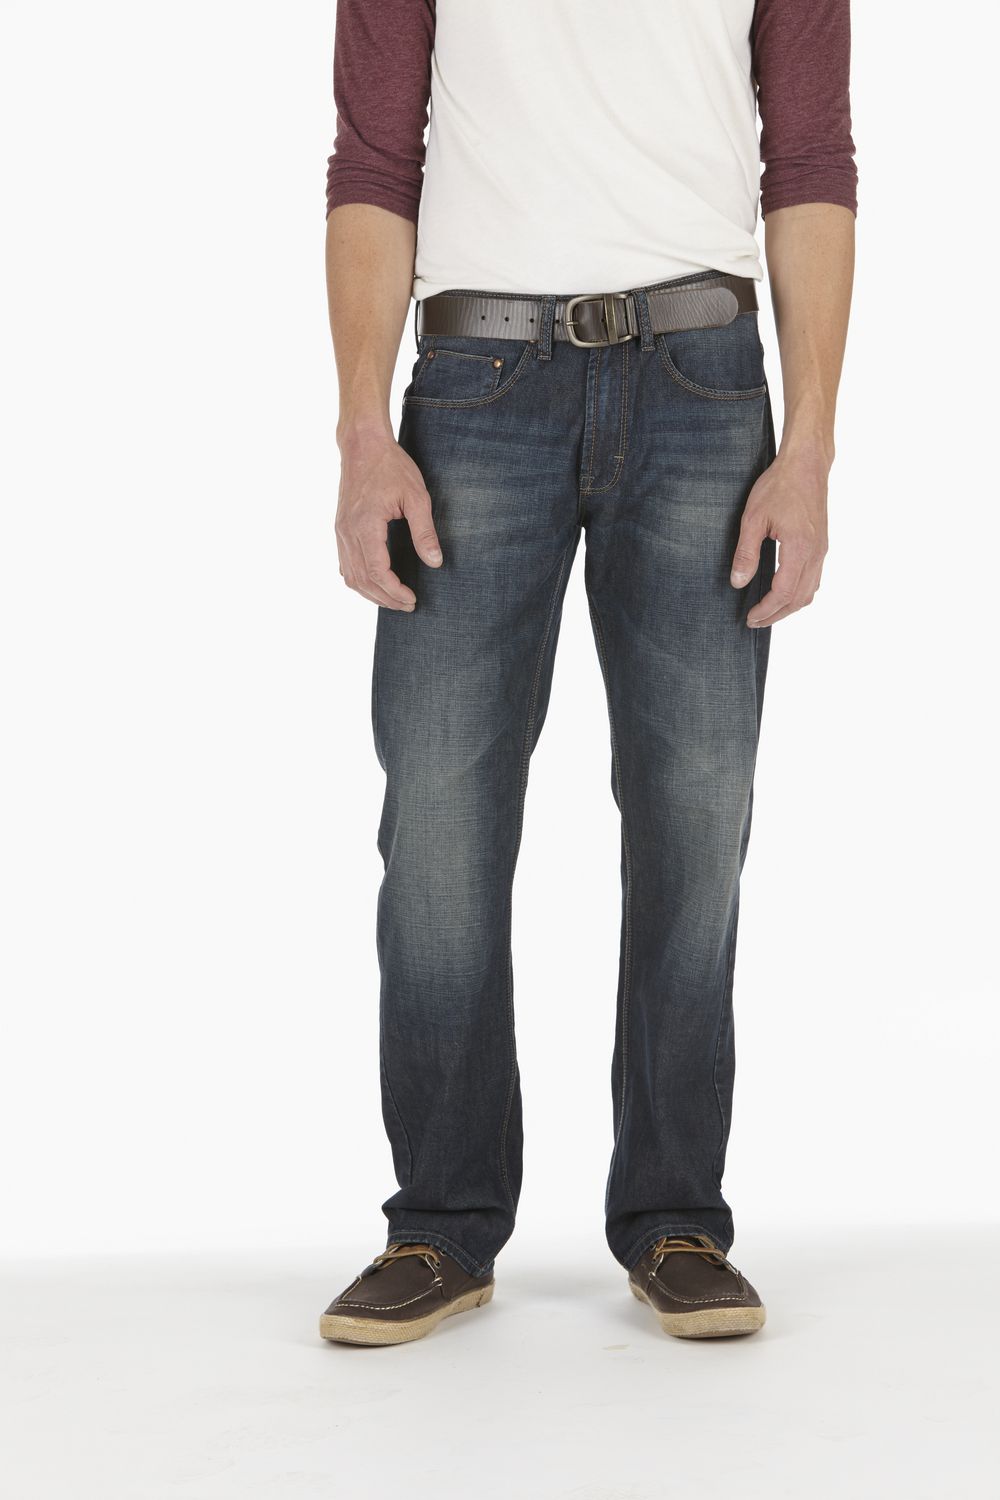 Wrangler Jeans Co. Red Vintage Straight Leg, Med Stretch | Walmart Canada